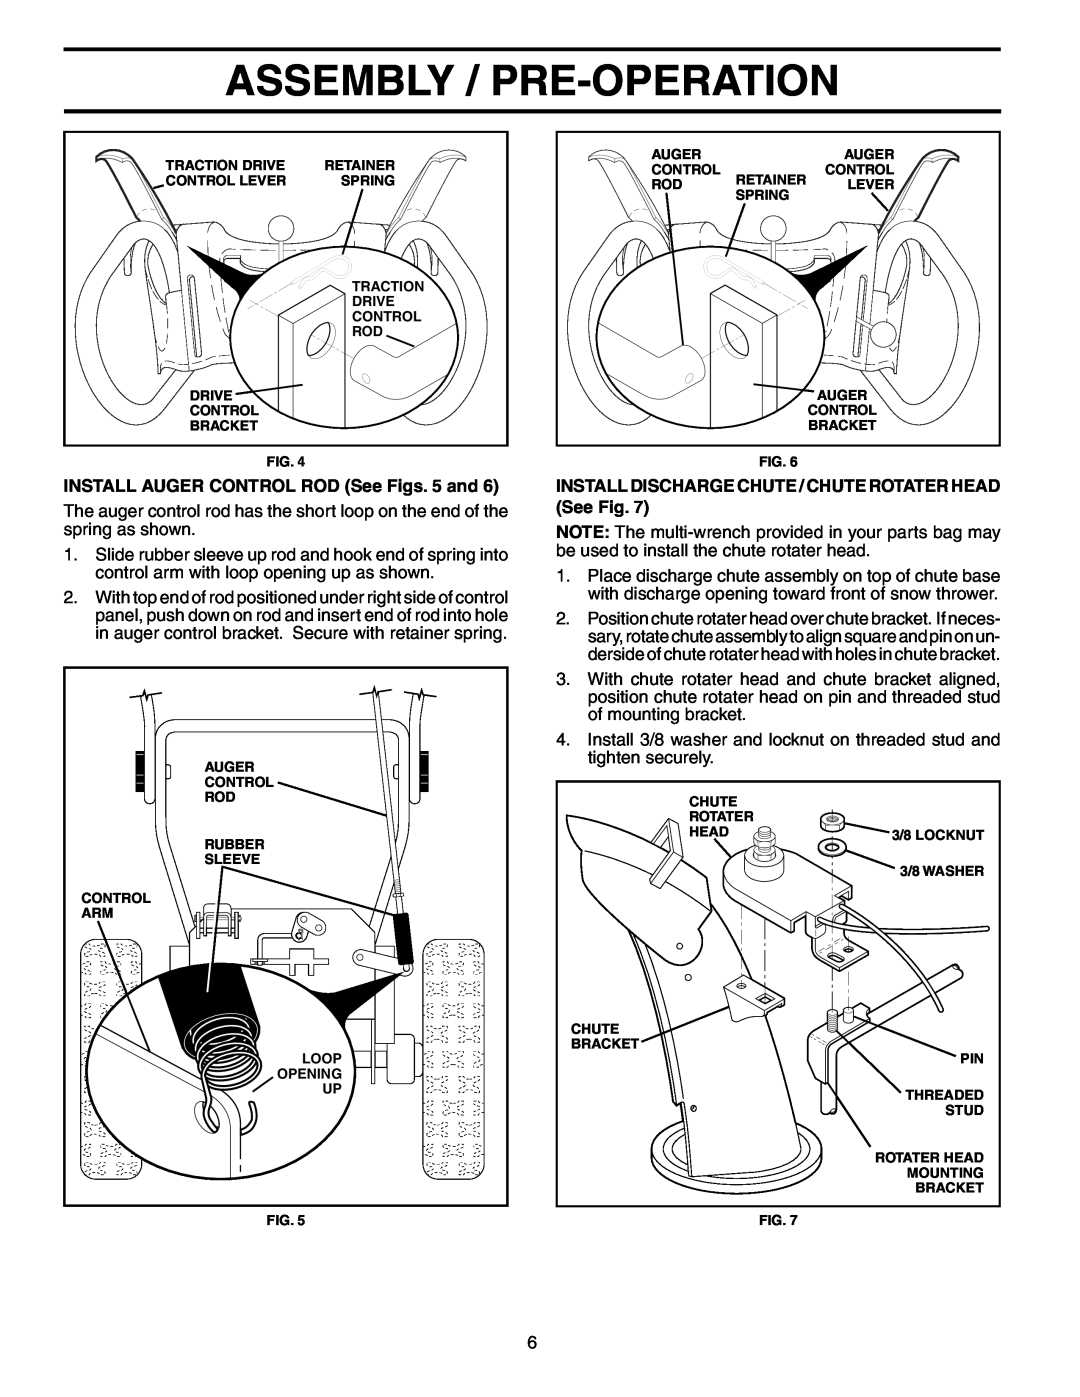 Poulan 192046 owner manual Assembly / Pre-Operation, INSTALL AUGER CONTROL ROD See Figs. 5 and 